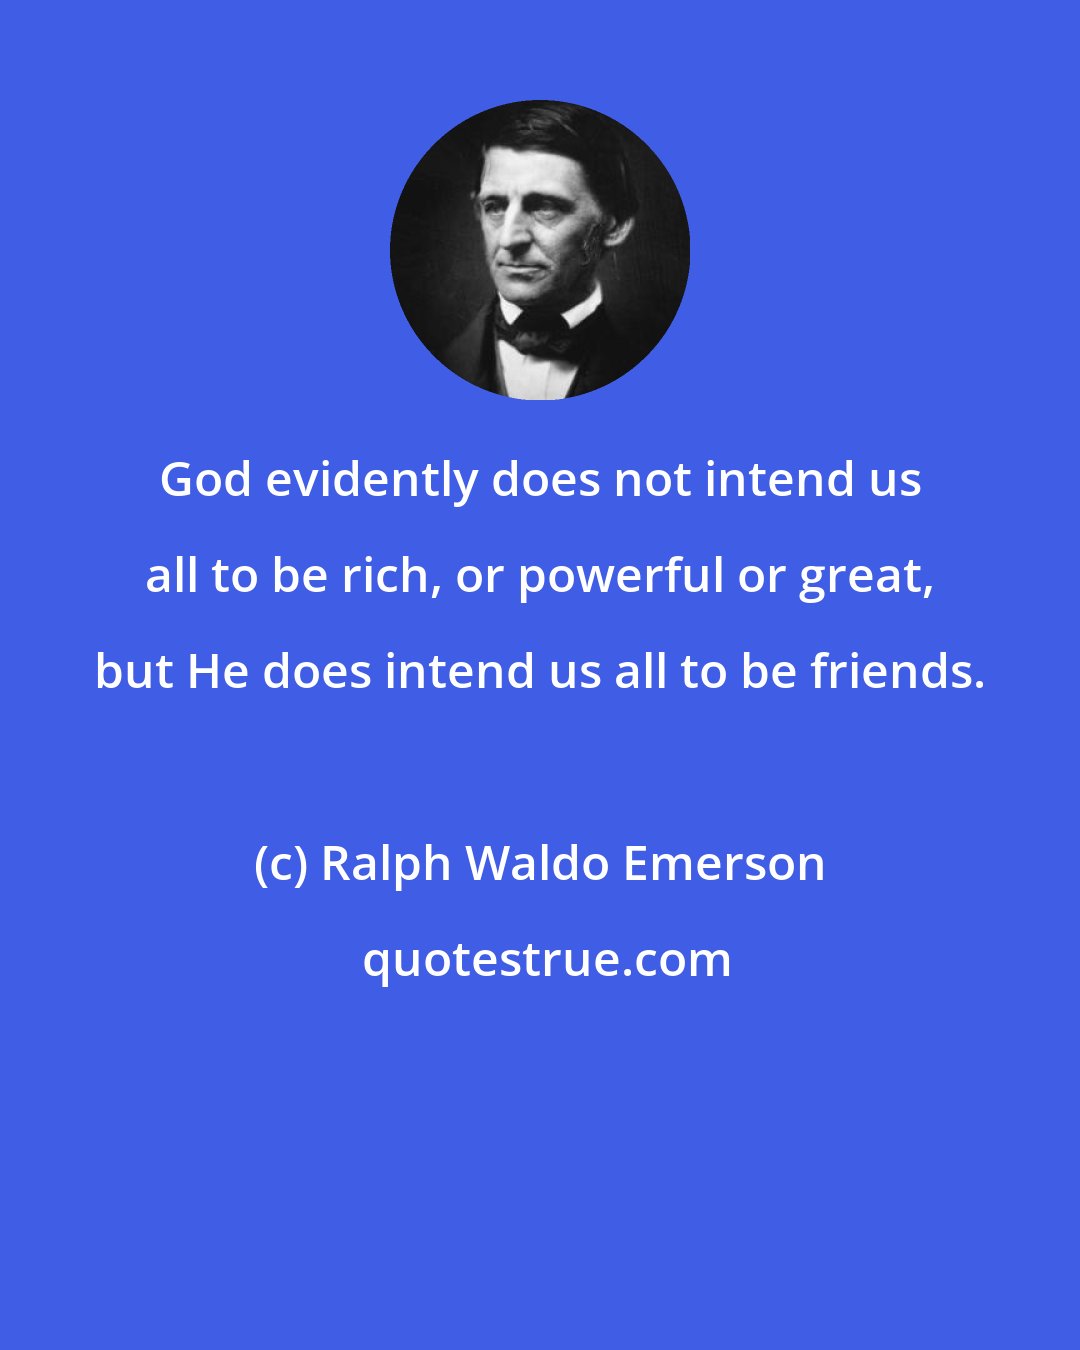 Ralph Waldo Emerson: God evidently does not intend us all to be rich, or powerful or great, but He does intend us all to be friends.